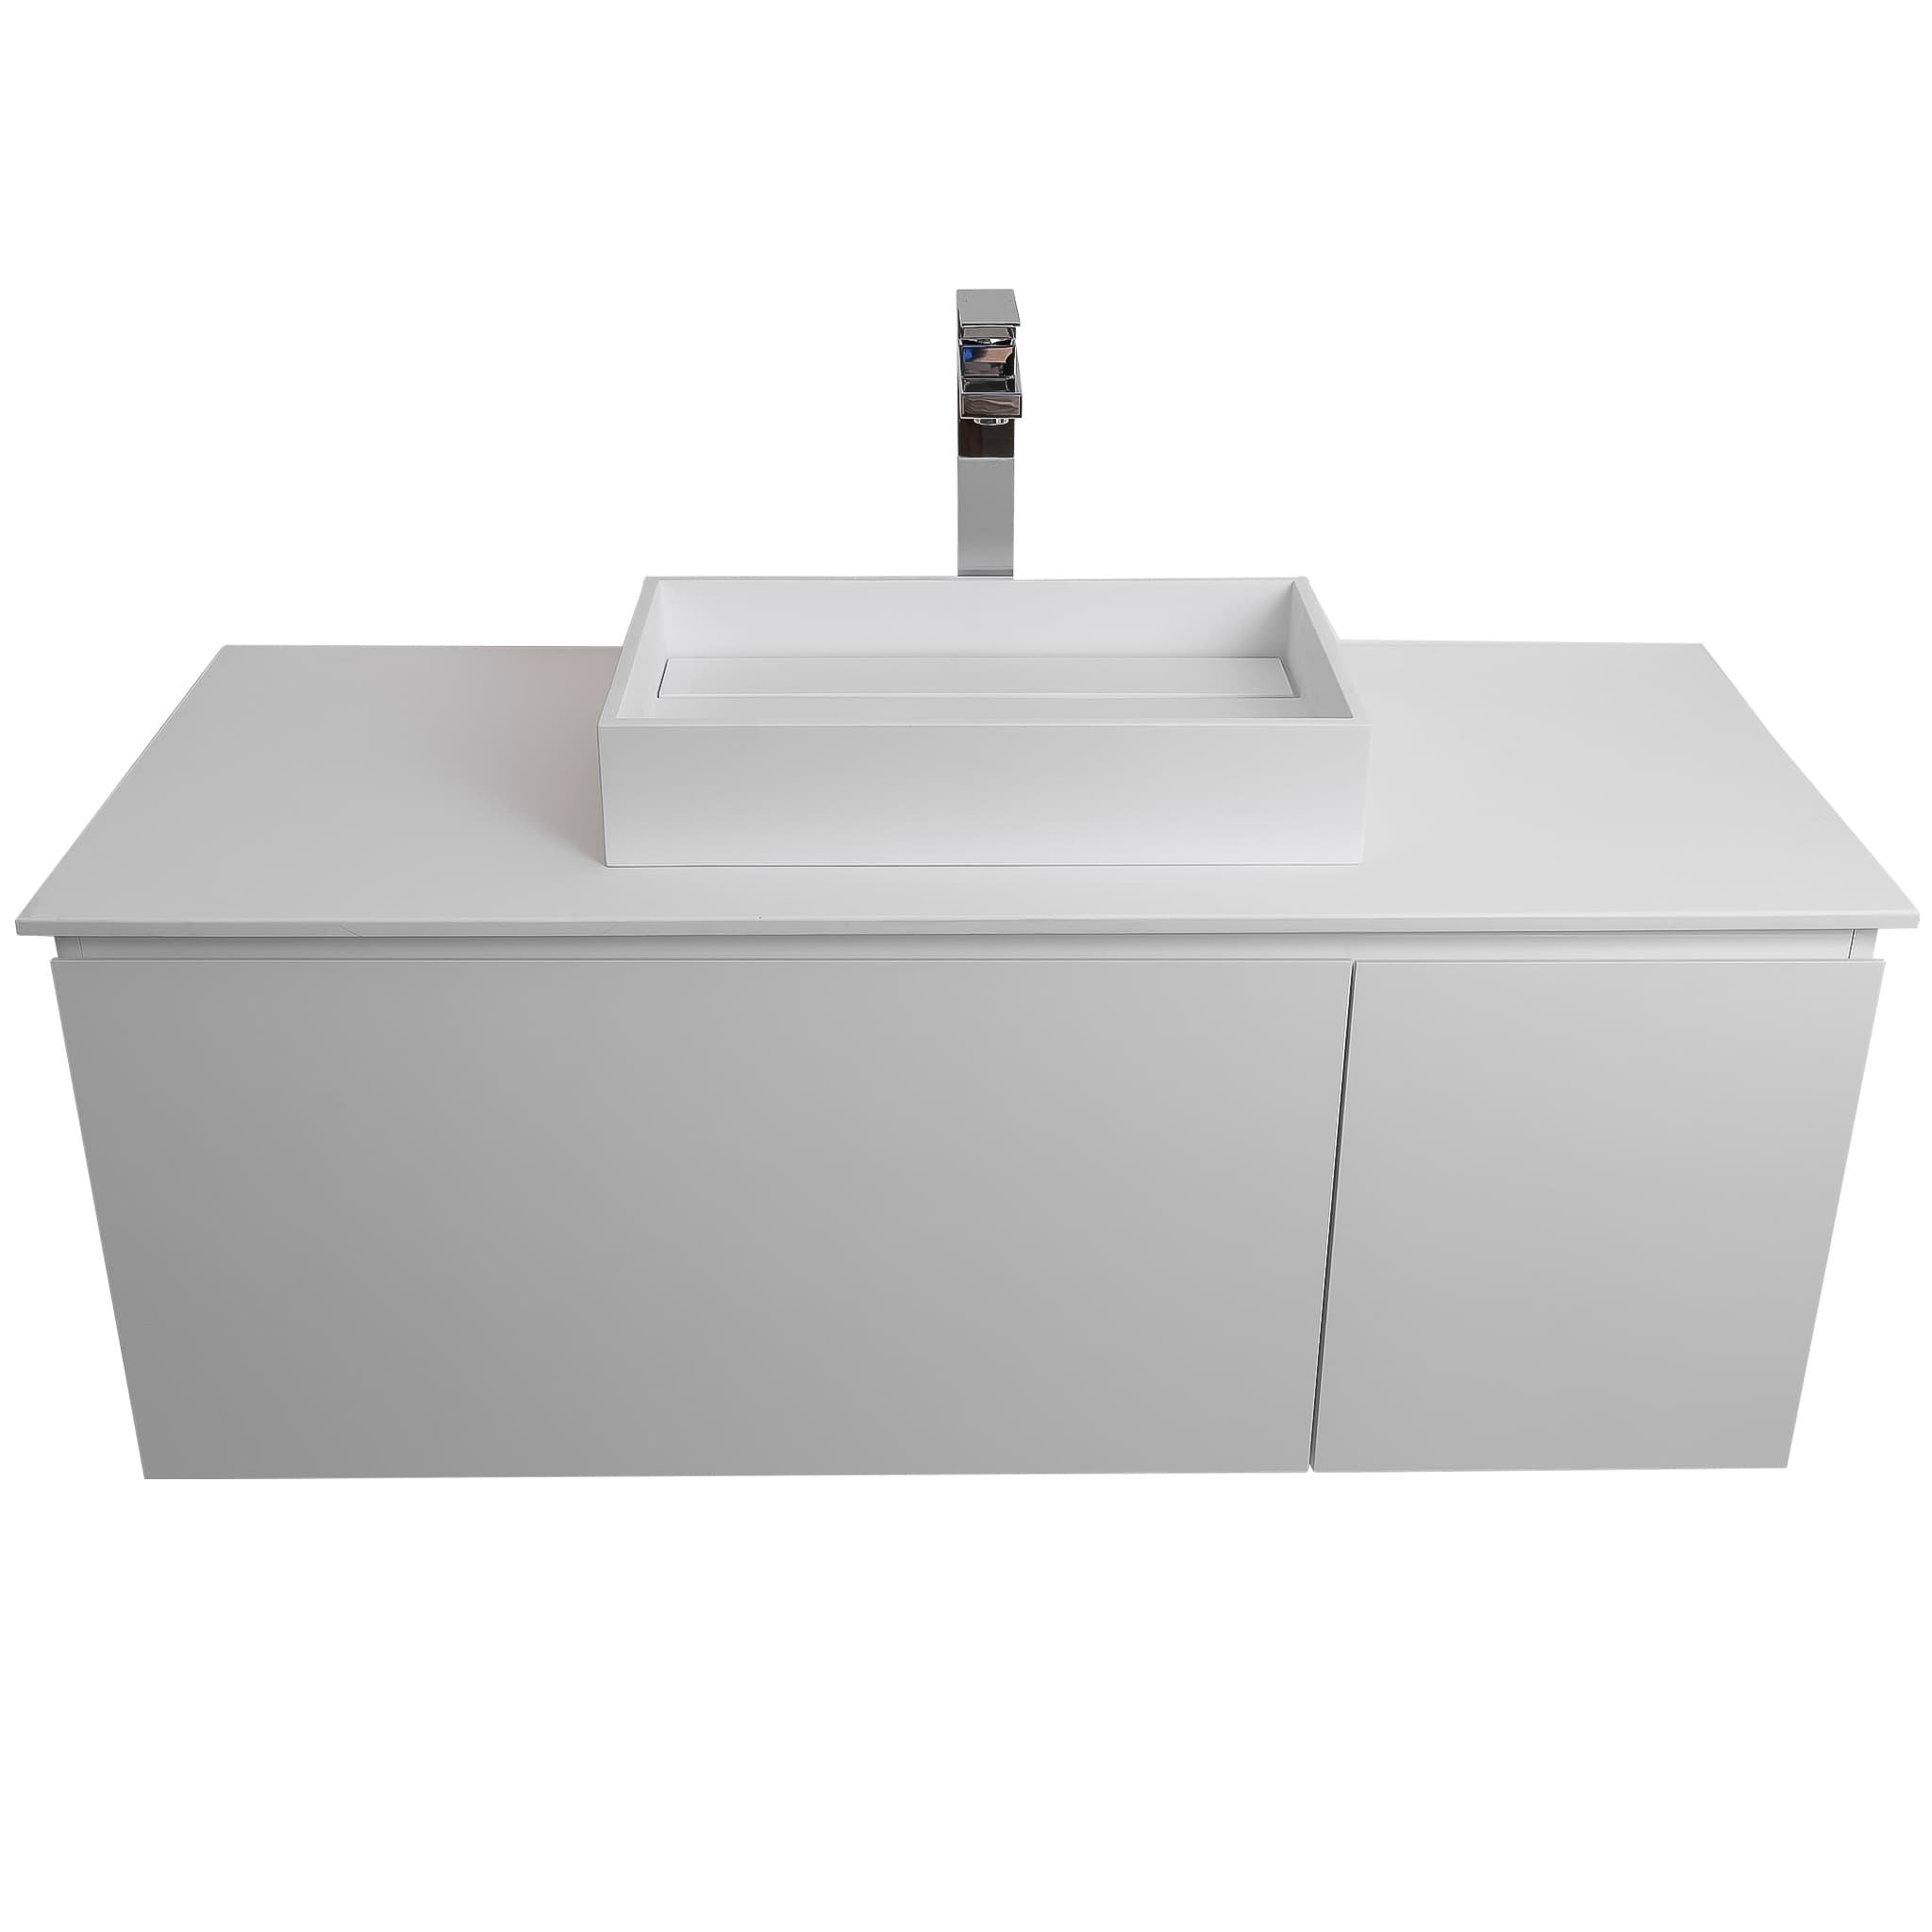 Venice 47.5 White High Gloss Cabinet, Solid Surface Flat White Counter And Infinity Square Solid Surface White Basin 1329, Wall Mounted Modern Vanity Set